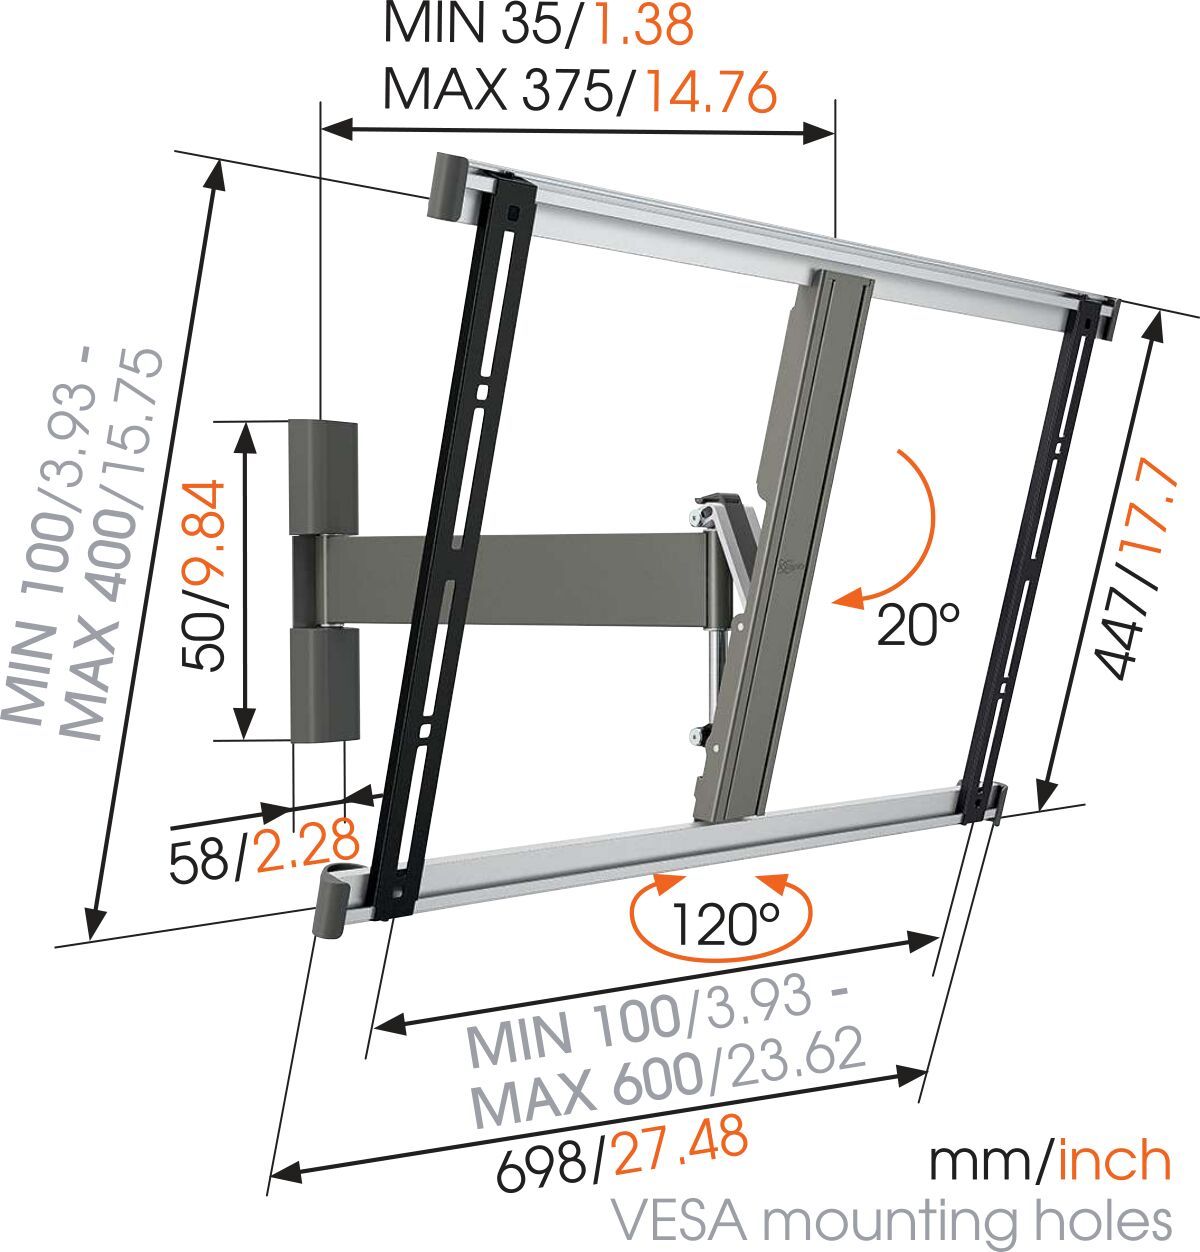 Vogel's THIN 325 UltraThin Full-Motion TV Wall Mount - Suitable for 40 up to 65 inch TVs - Motion (up to 120°) - Tilt up to 20° - Dimensions